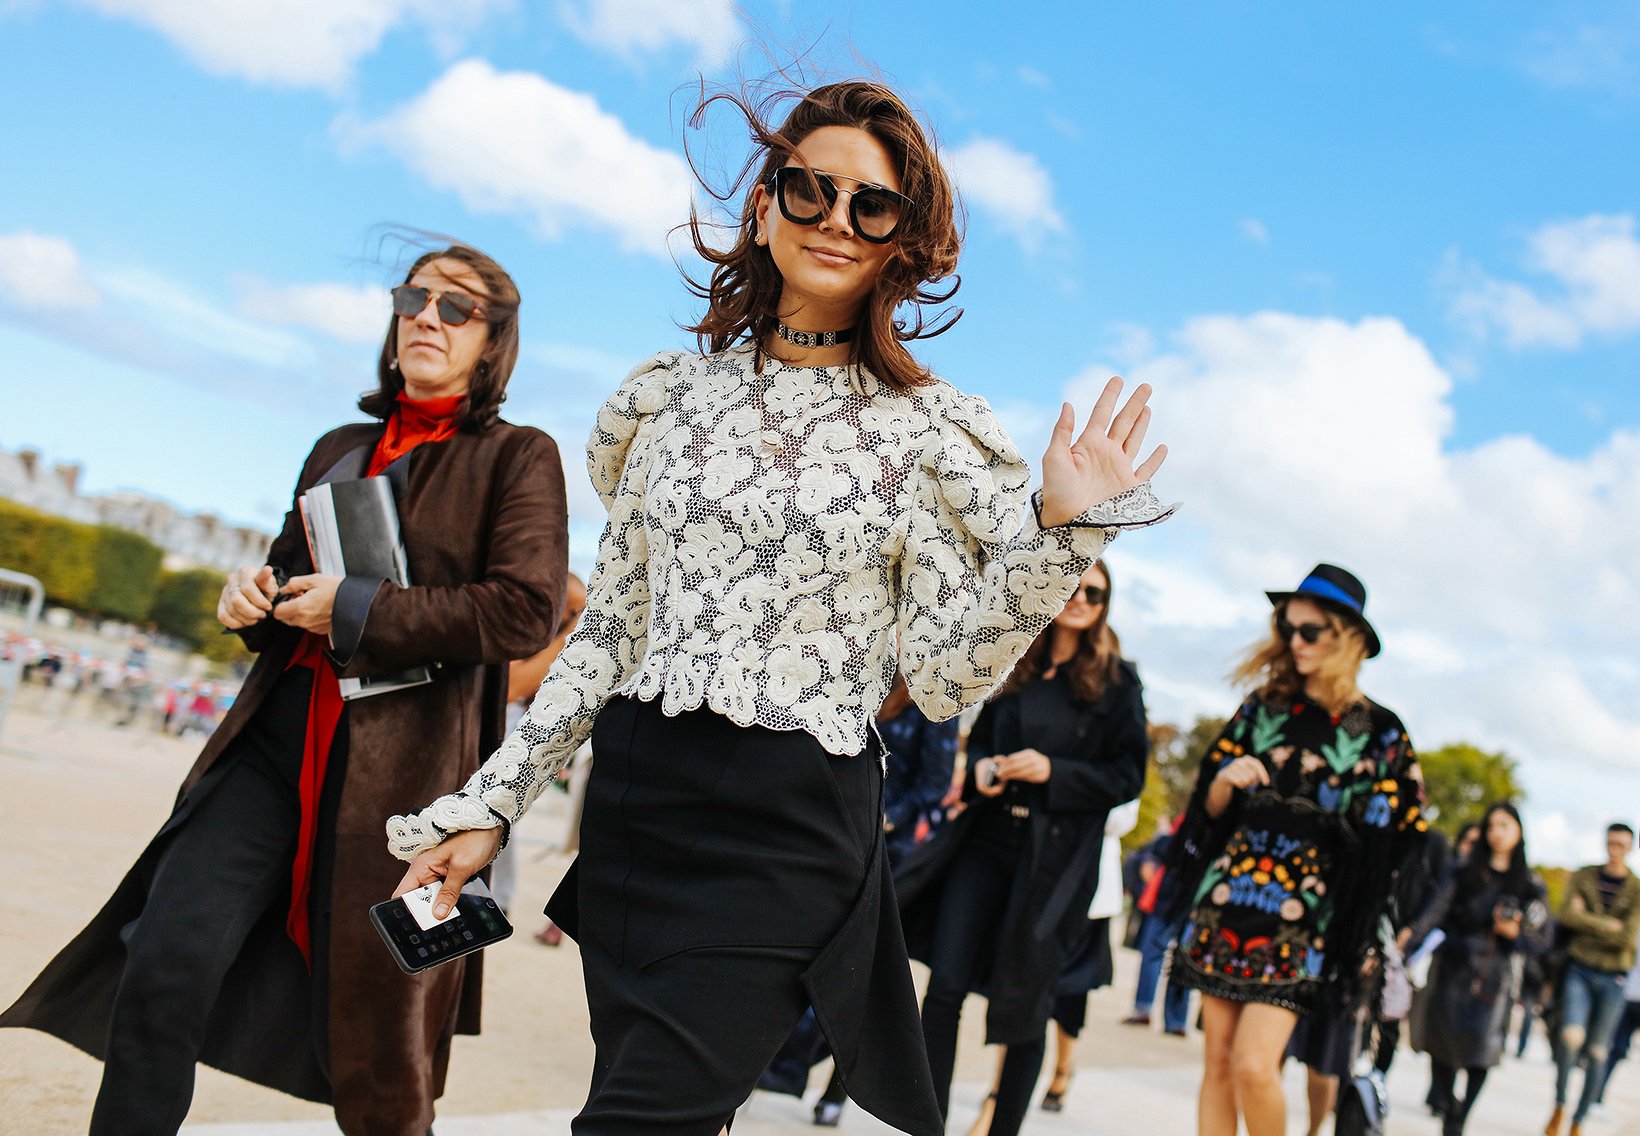 The Best Christine Centenera Outfits From Fashion Month